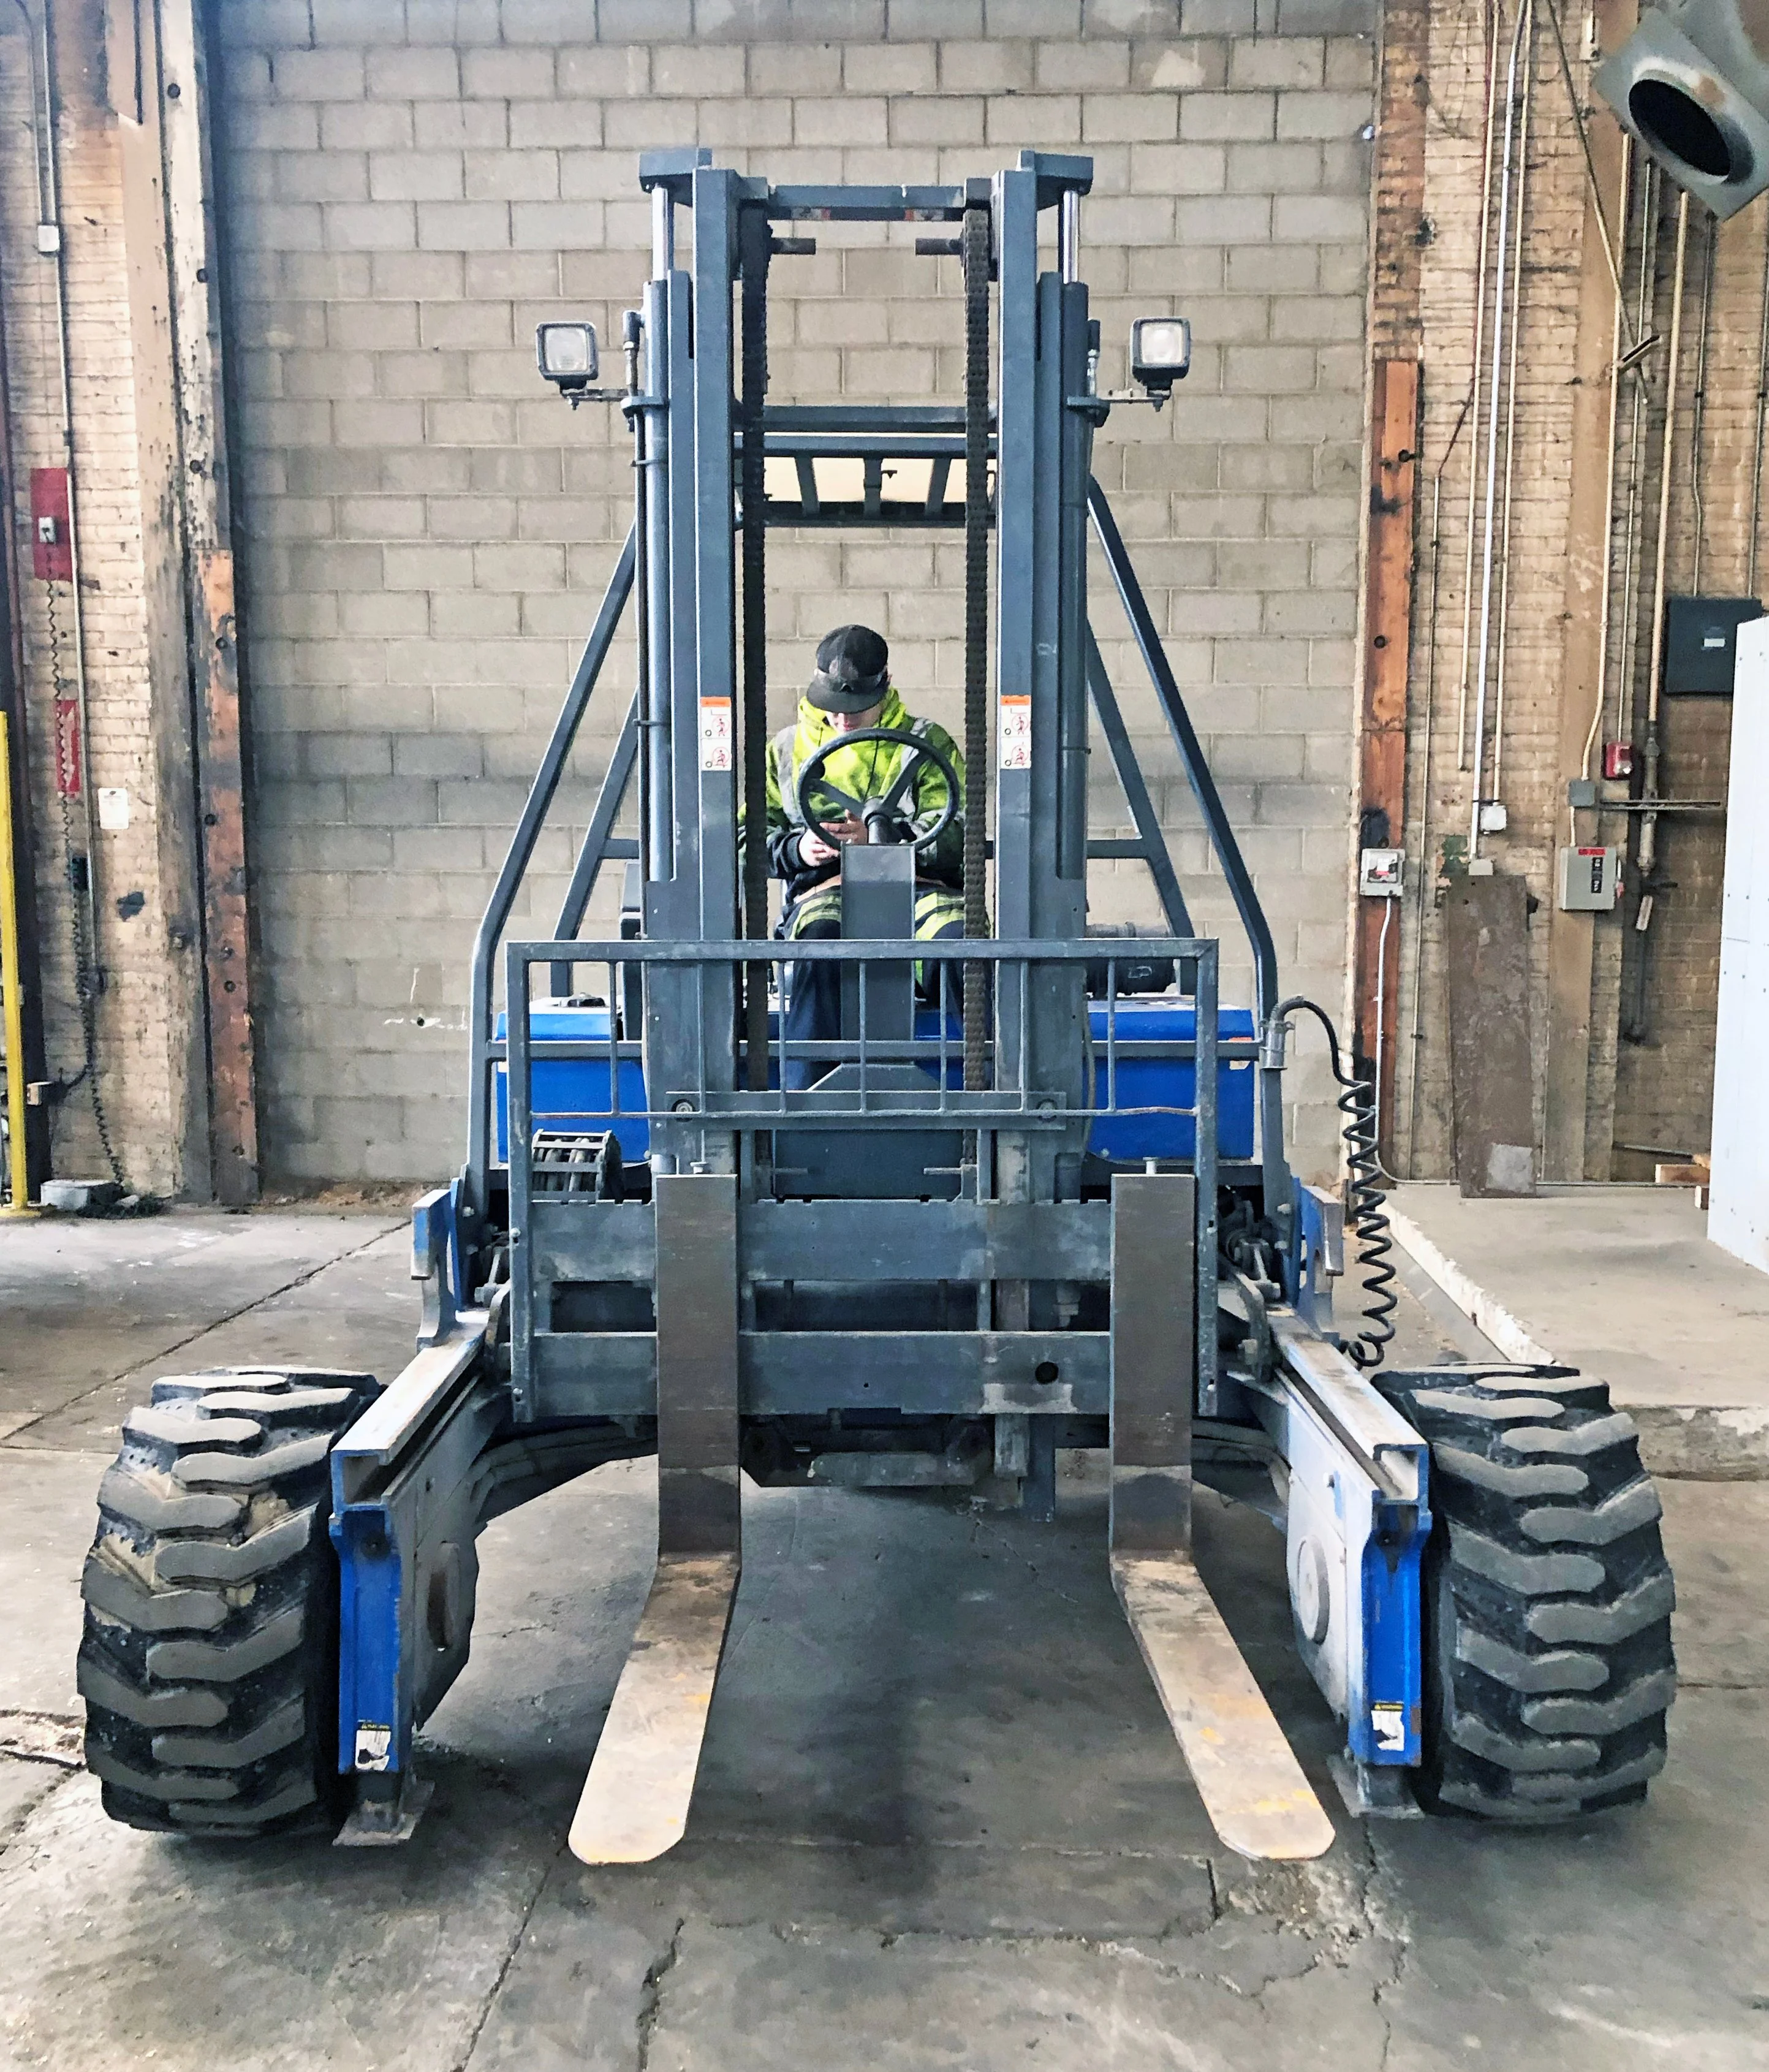 Semax introduces unique forklifts to reduce goods damage